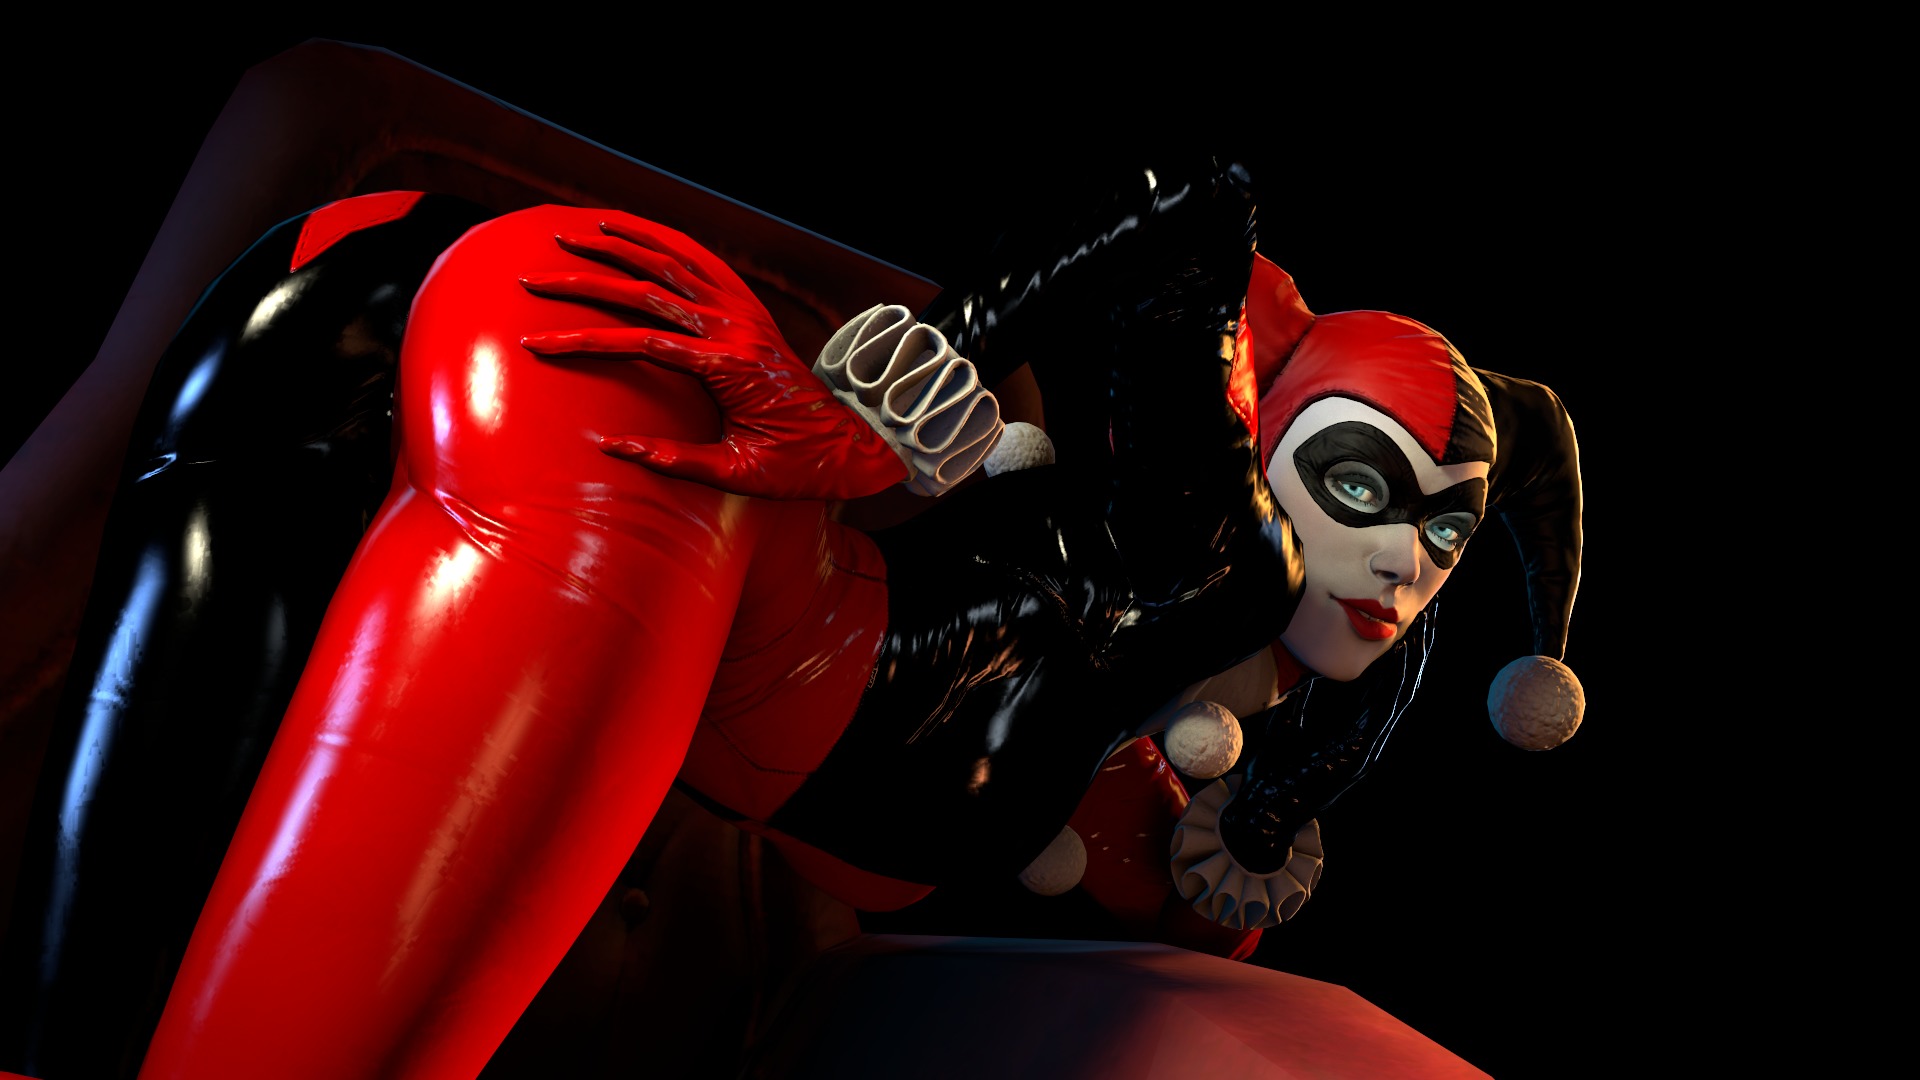 Classic Harley Quinn Wallpapers